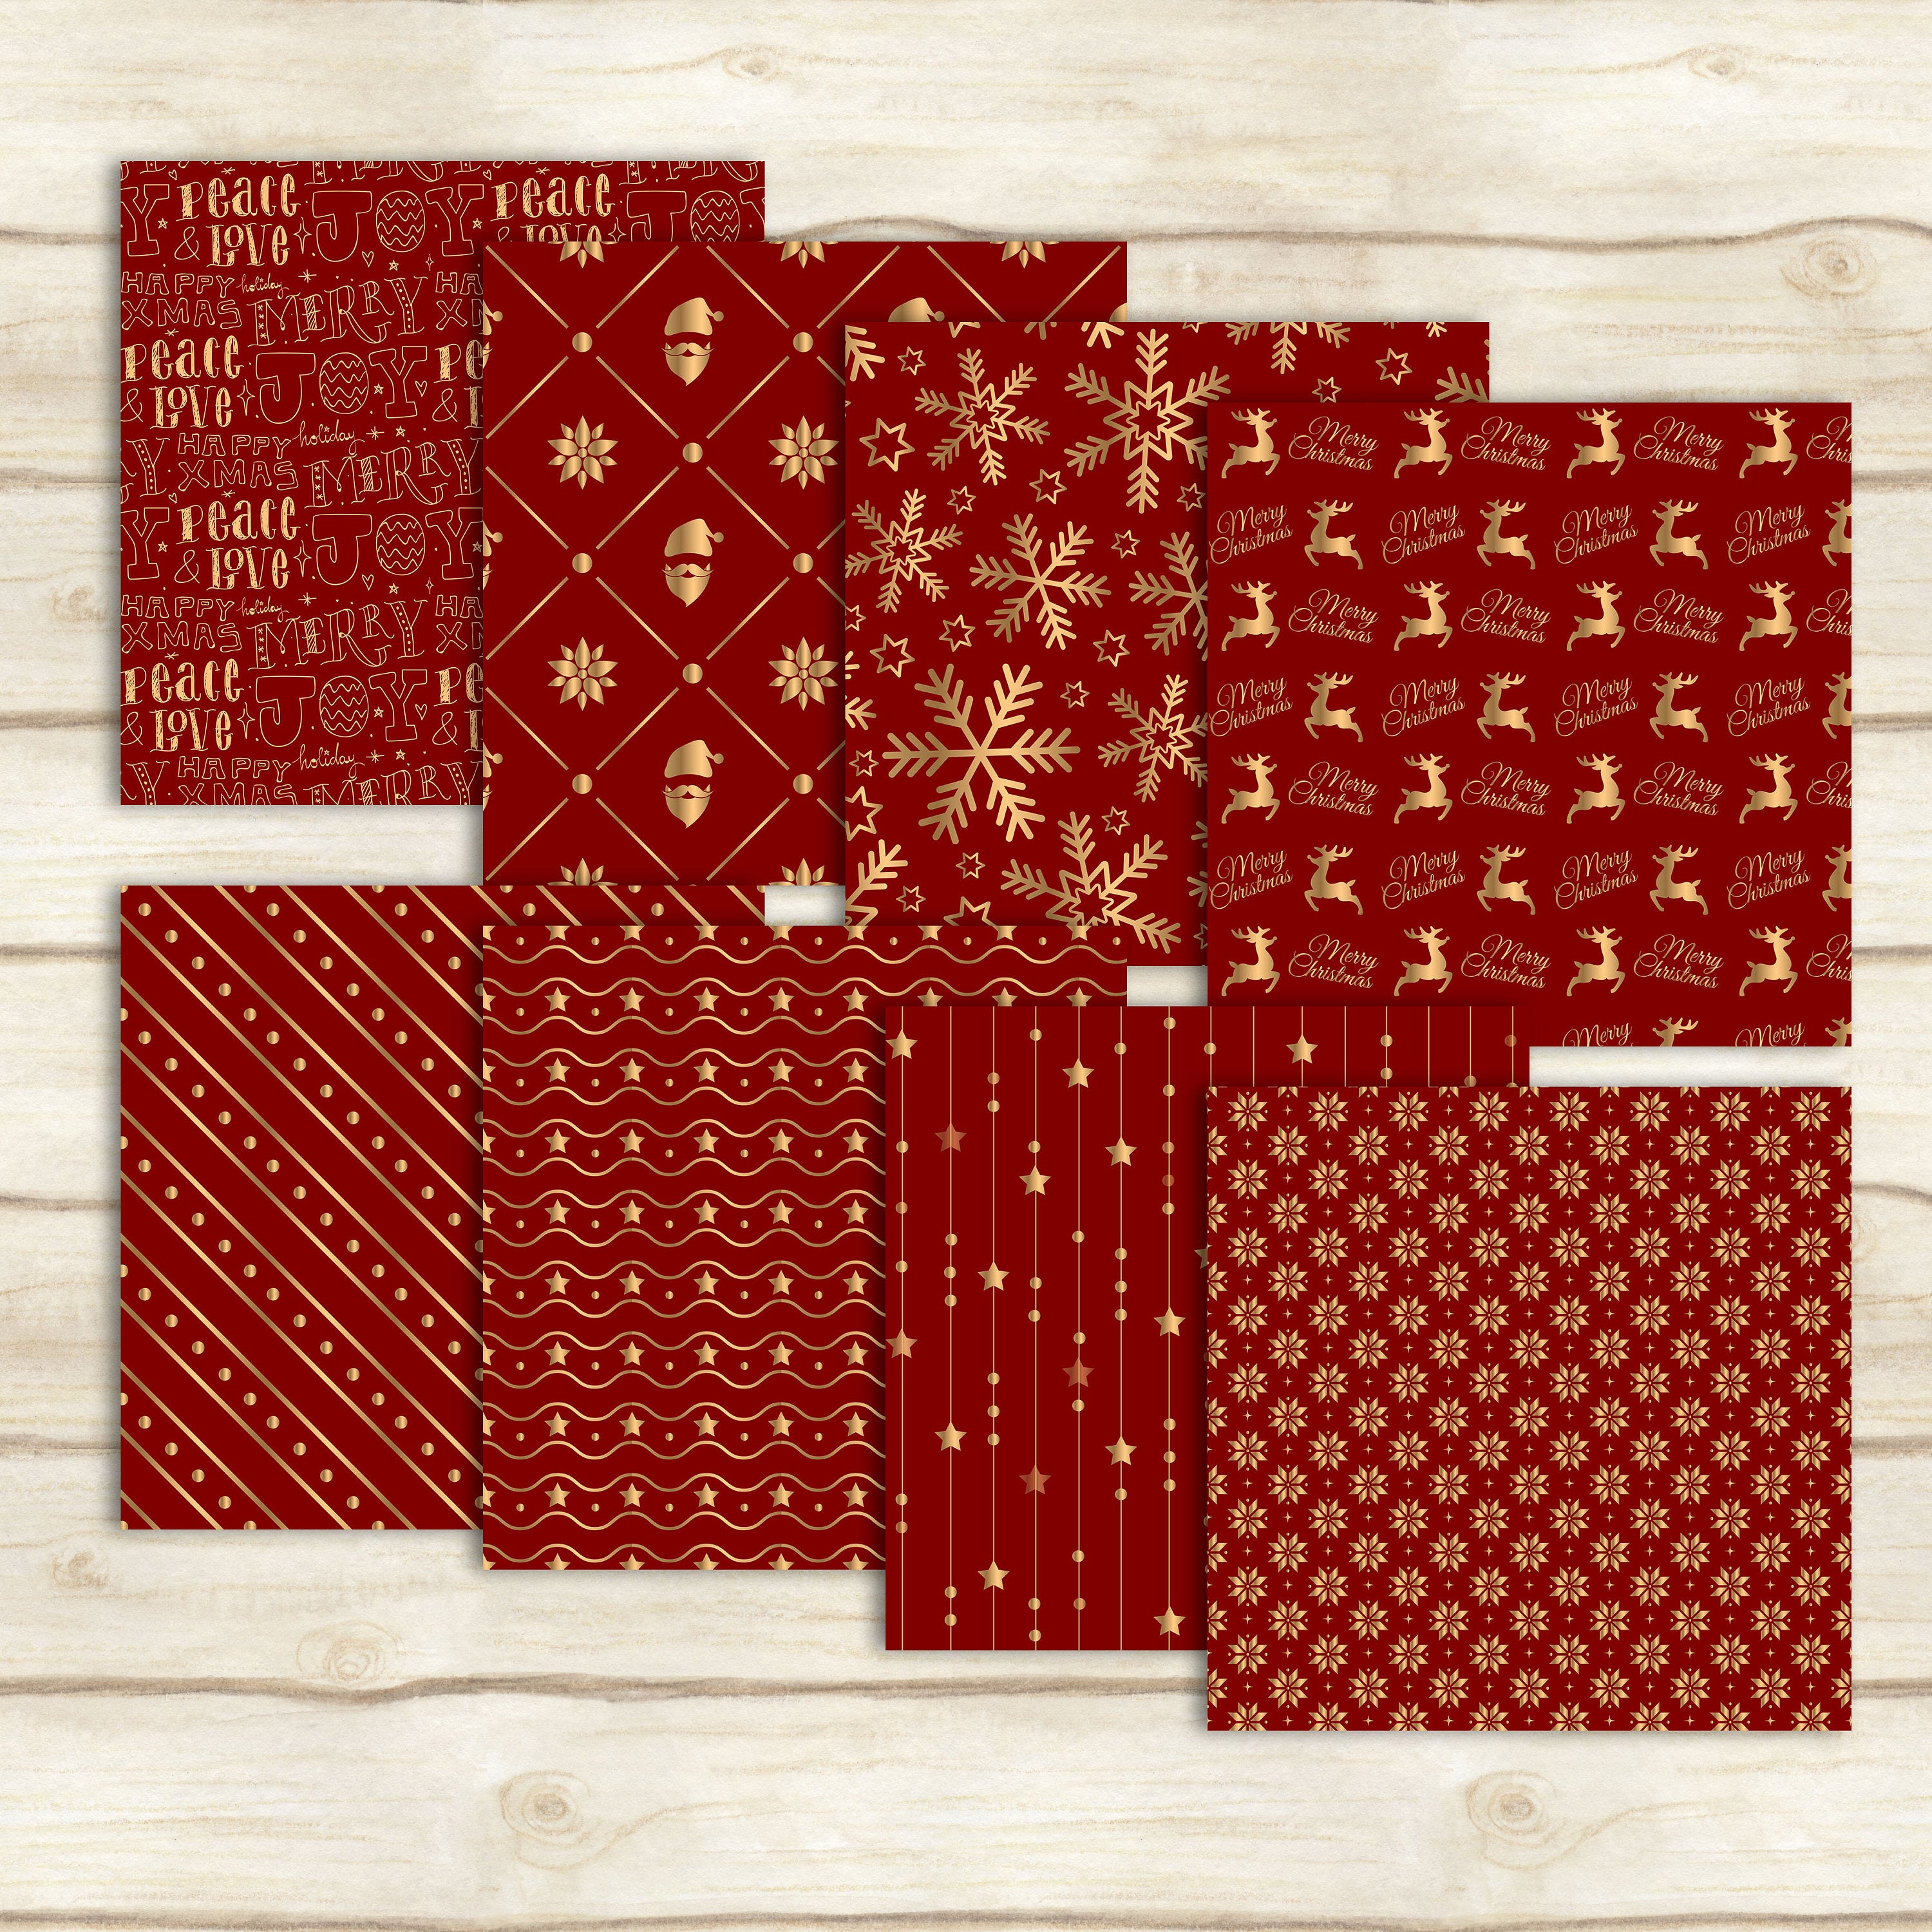 24 Red & Gold Christmas Digital Papers 12 x 12 inch 300 Dpi Instant Download, Scrapbook Papers, Christmas Papers, Commercial Use